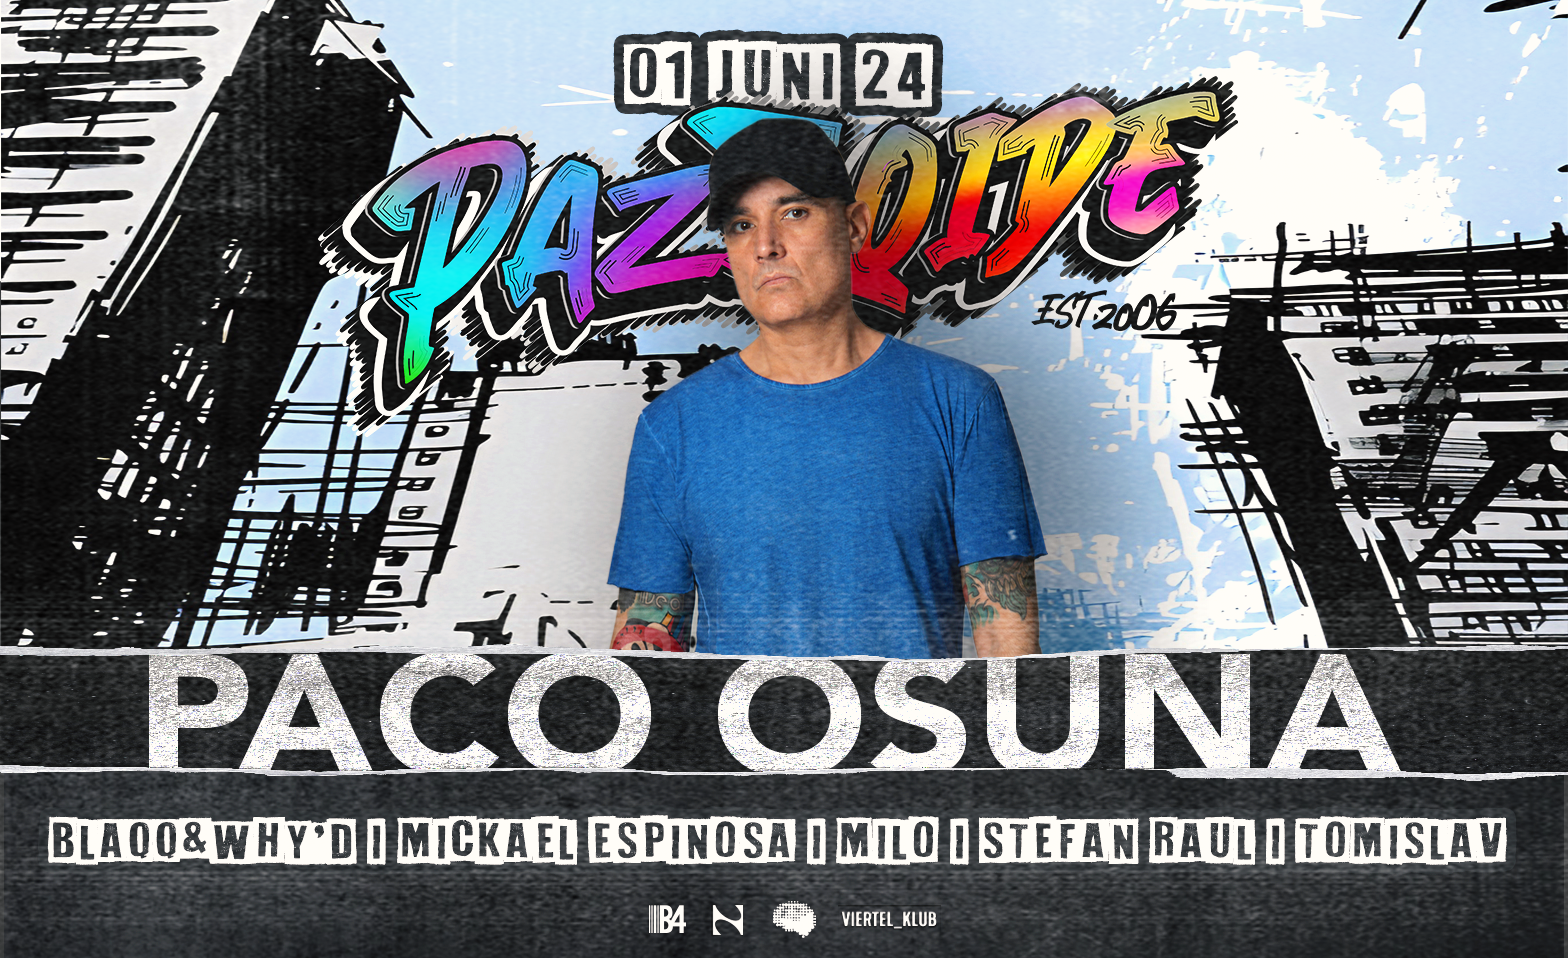 PazZoide with Paco Osuna - フライヤー表